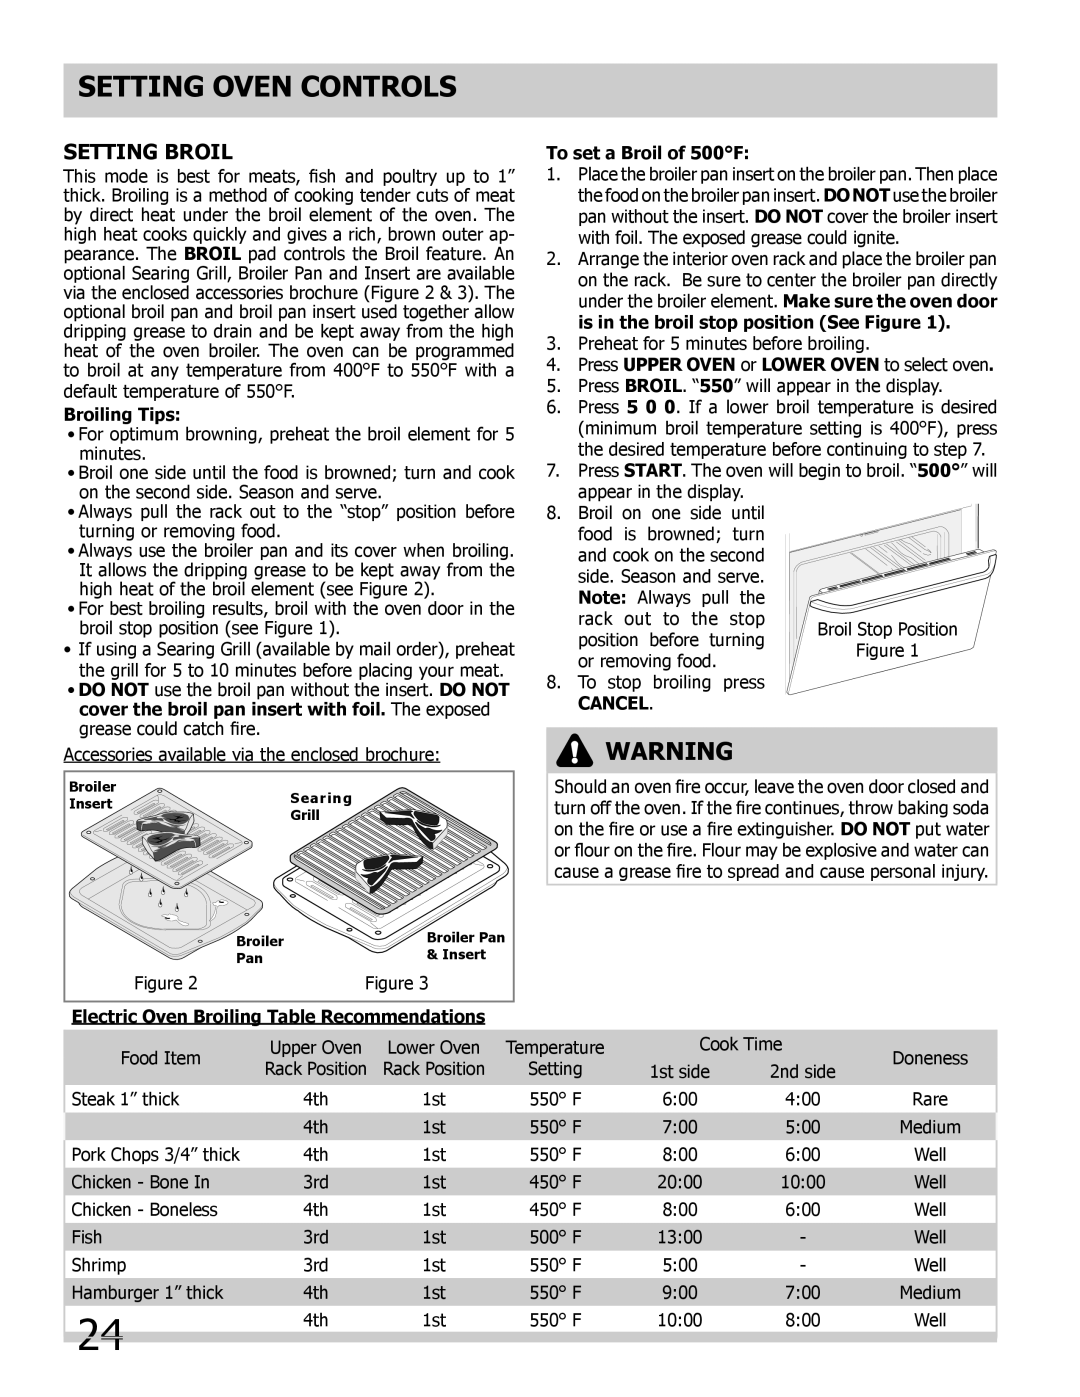 Frigidaire 318205204 Setting Broil, Broiling Tips, Electric Oven Broiling Table Recommendations, To set a Broil of 500F 